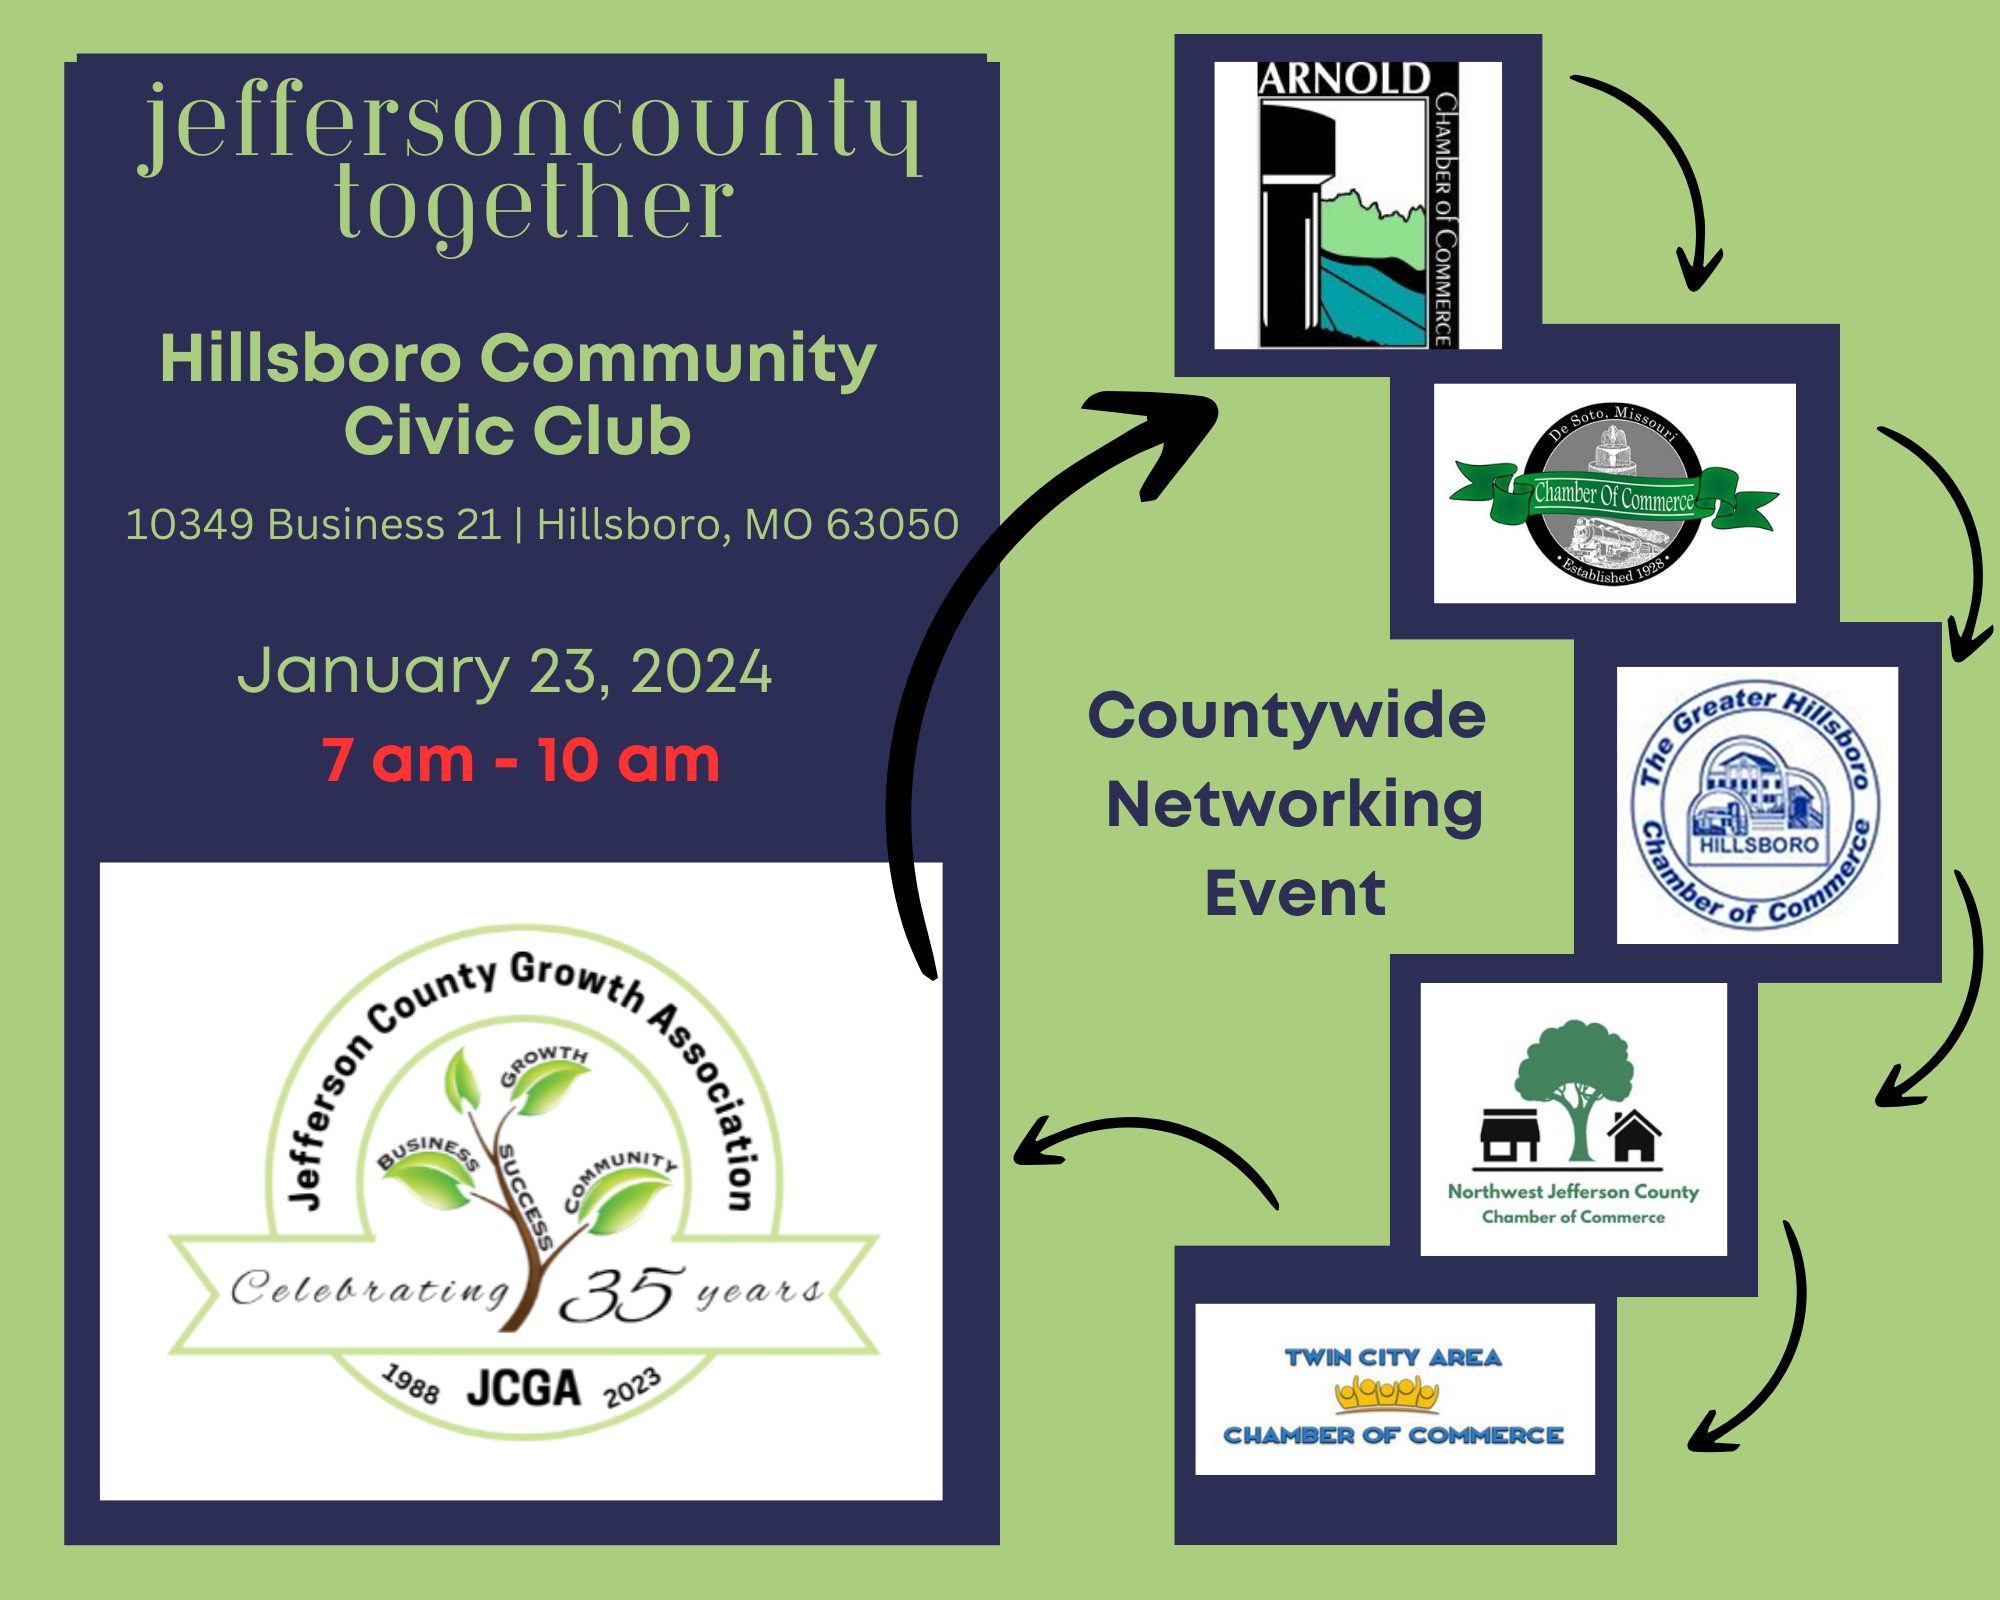 Jefferson County Together - Time Change